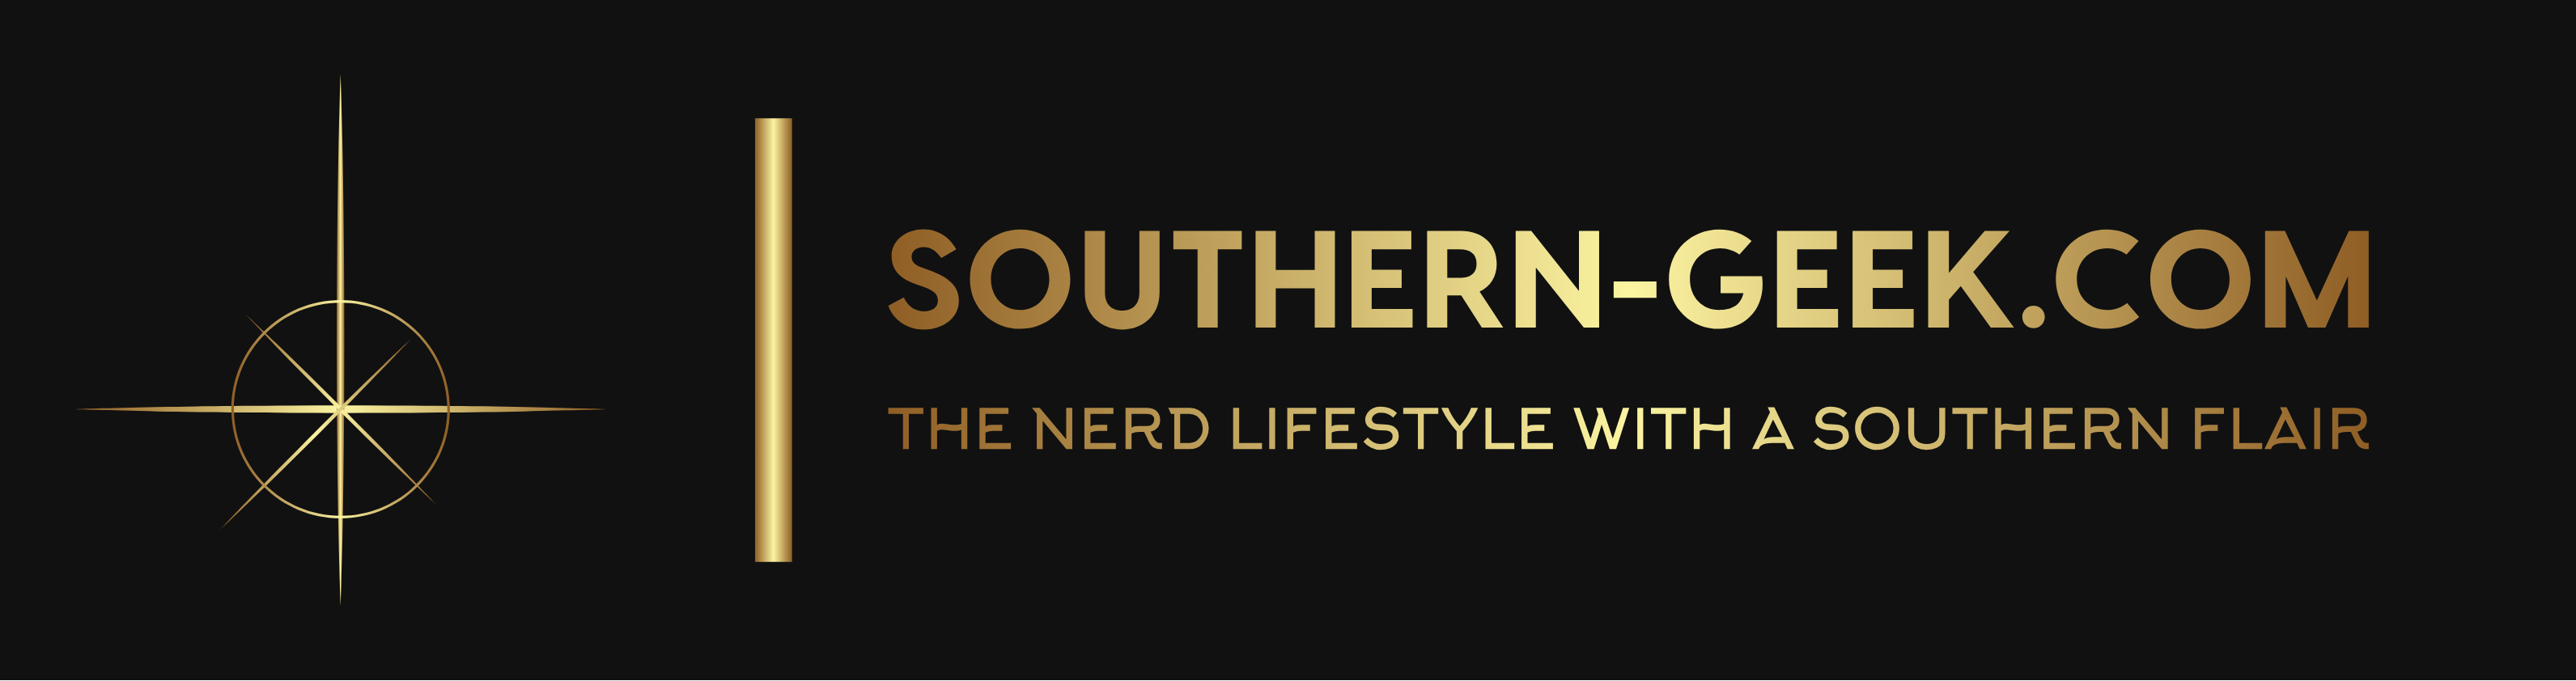 Home of the Southern Sci-Fi Geeks